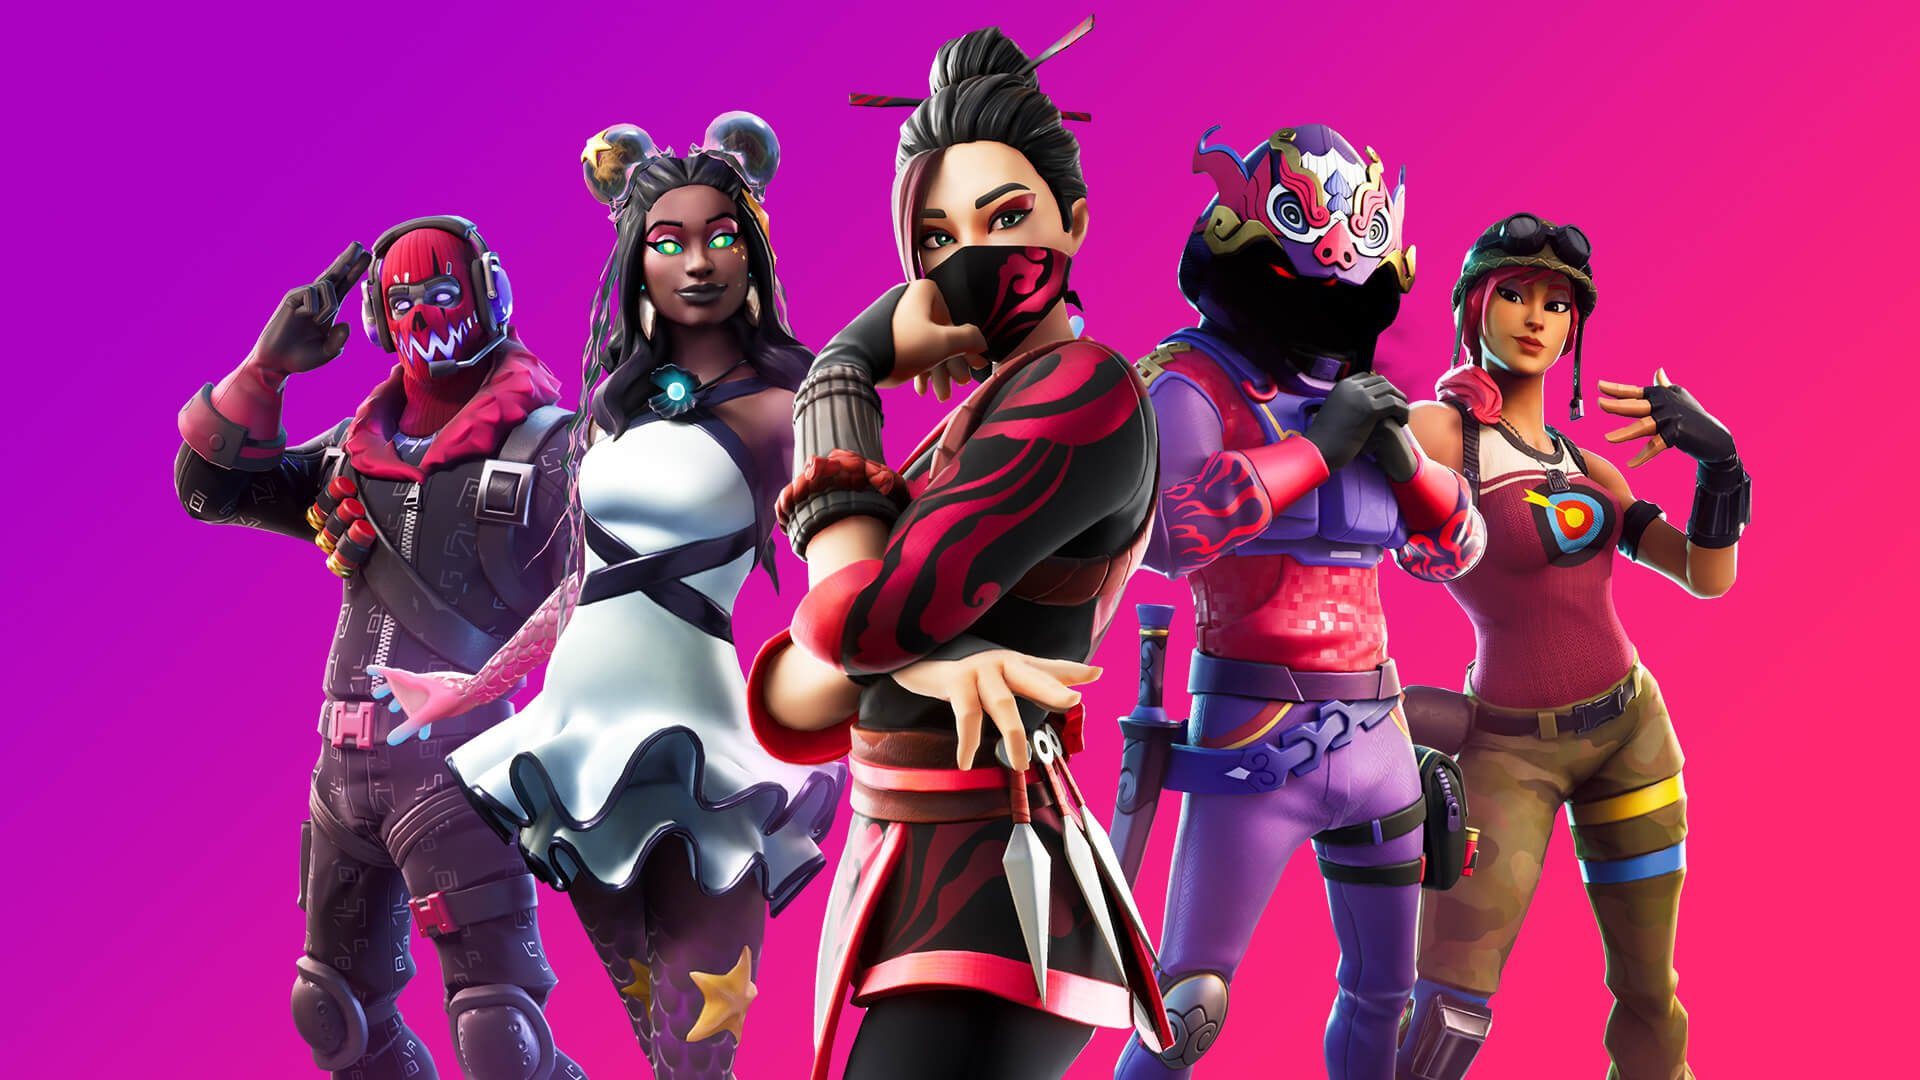 Apple bars 'Fortnite' from App Store, Epic Games CEO says